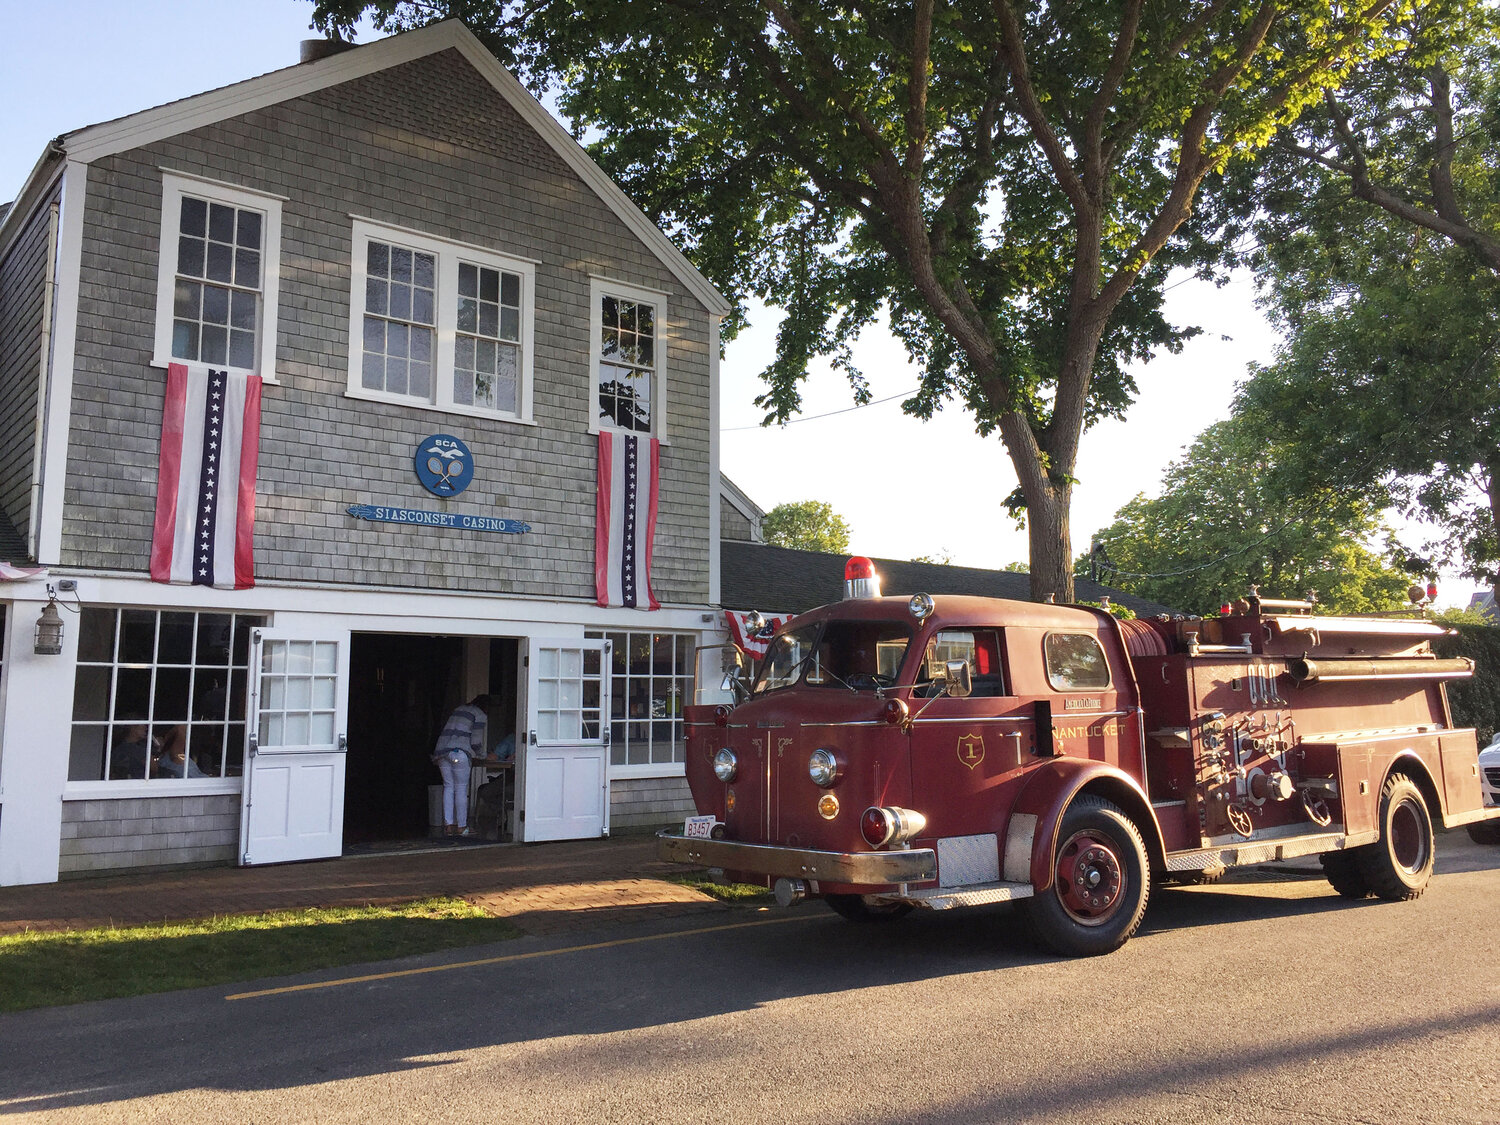 Mary Longacre's 1957 fire engine at the Sconset Casino, July 6, 2016, honoring retired Sconset firefighters at the Sconset Trust’s annual meeting.